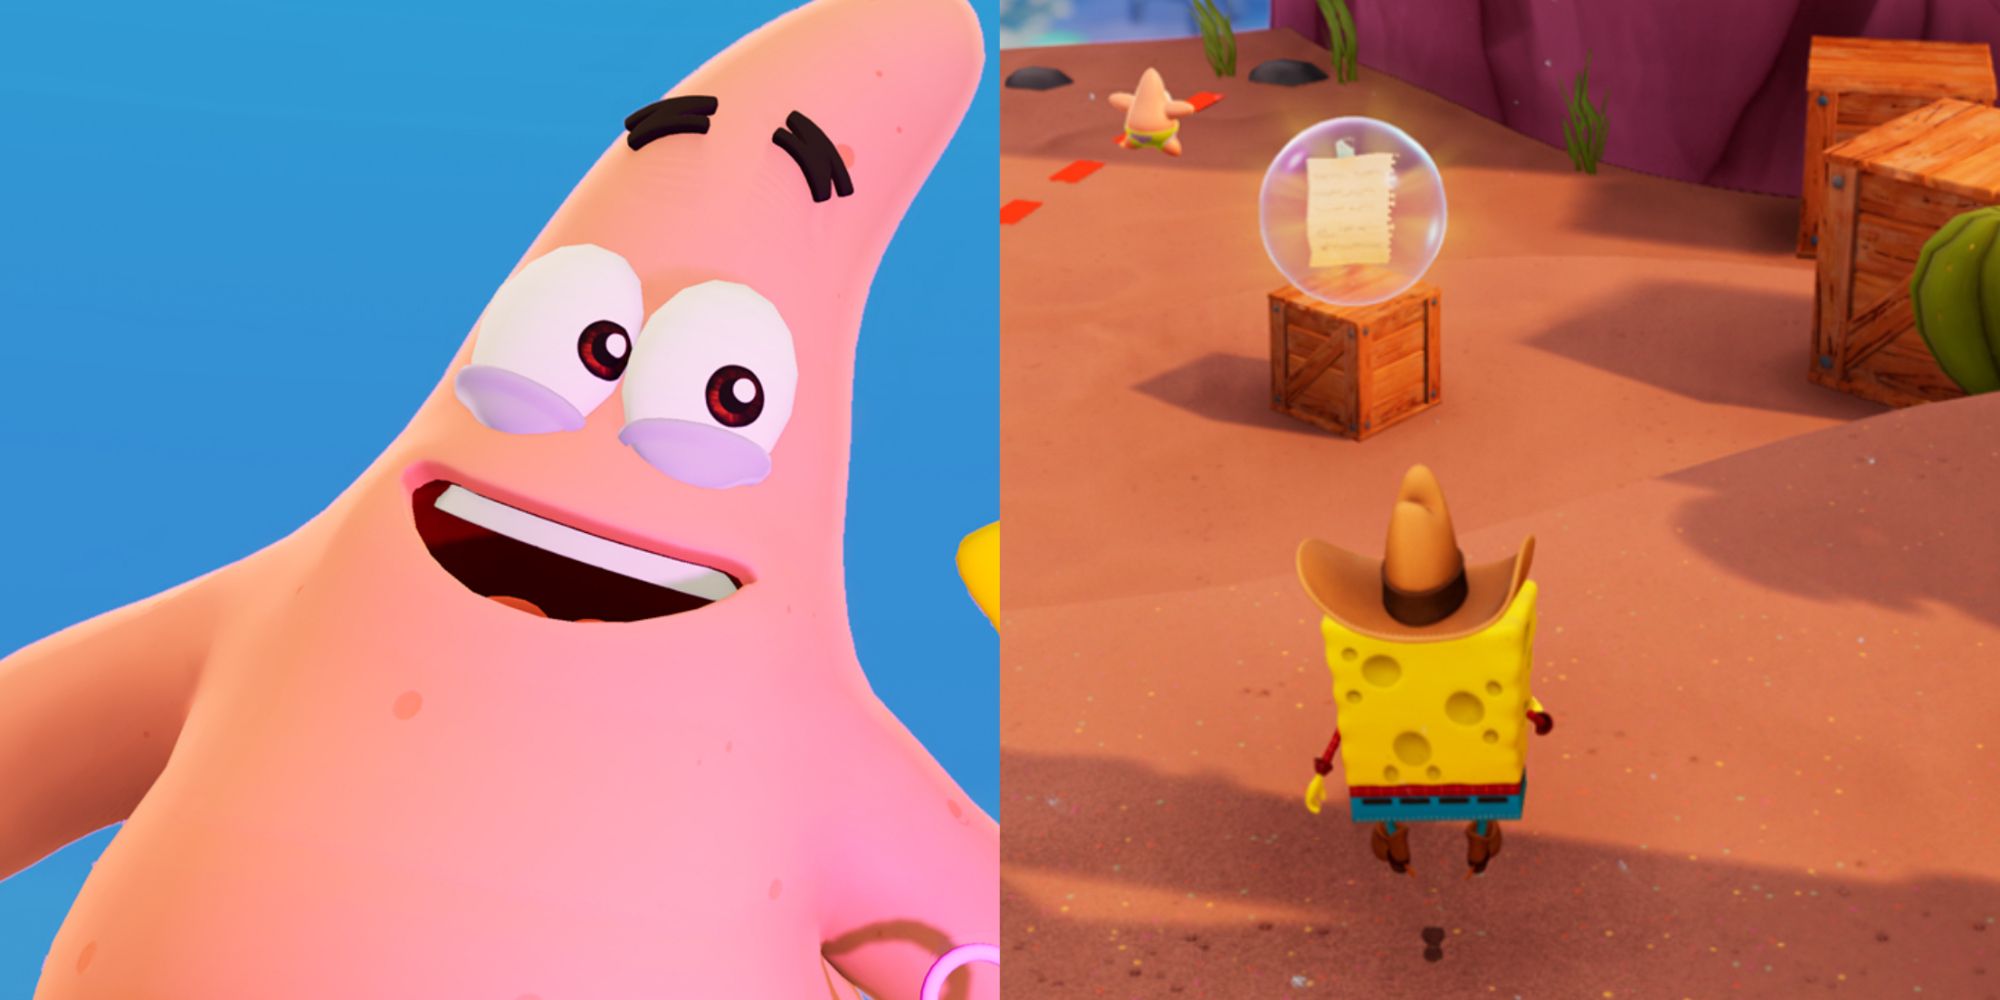 SpongeBob Cosmic Shake Sticky Notes Location Guide Featured Split Image Of Patrick and Sticky Note